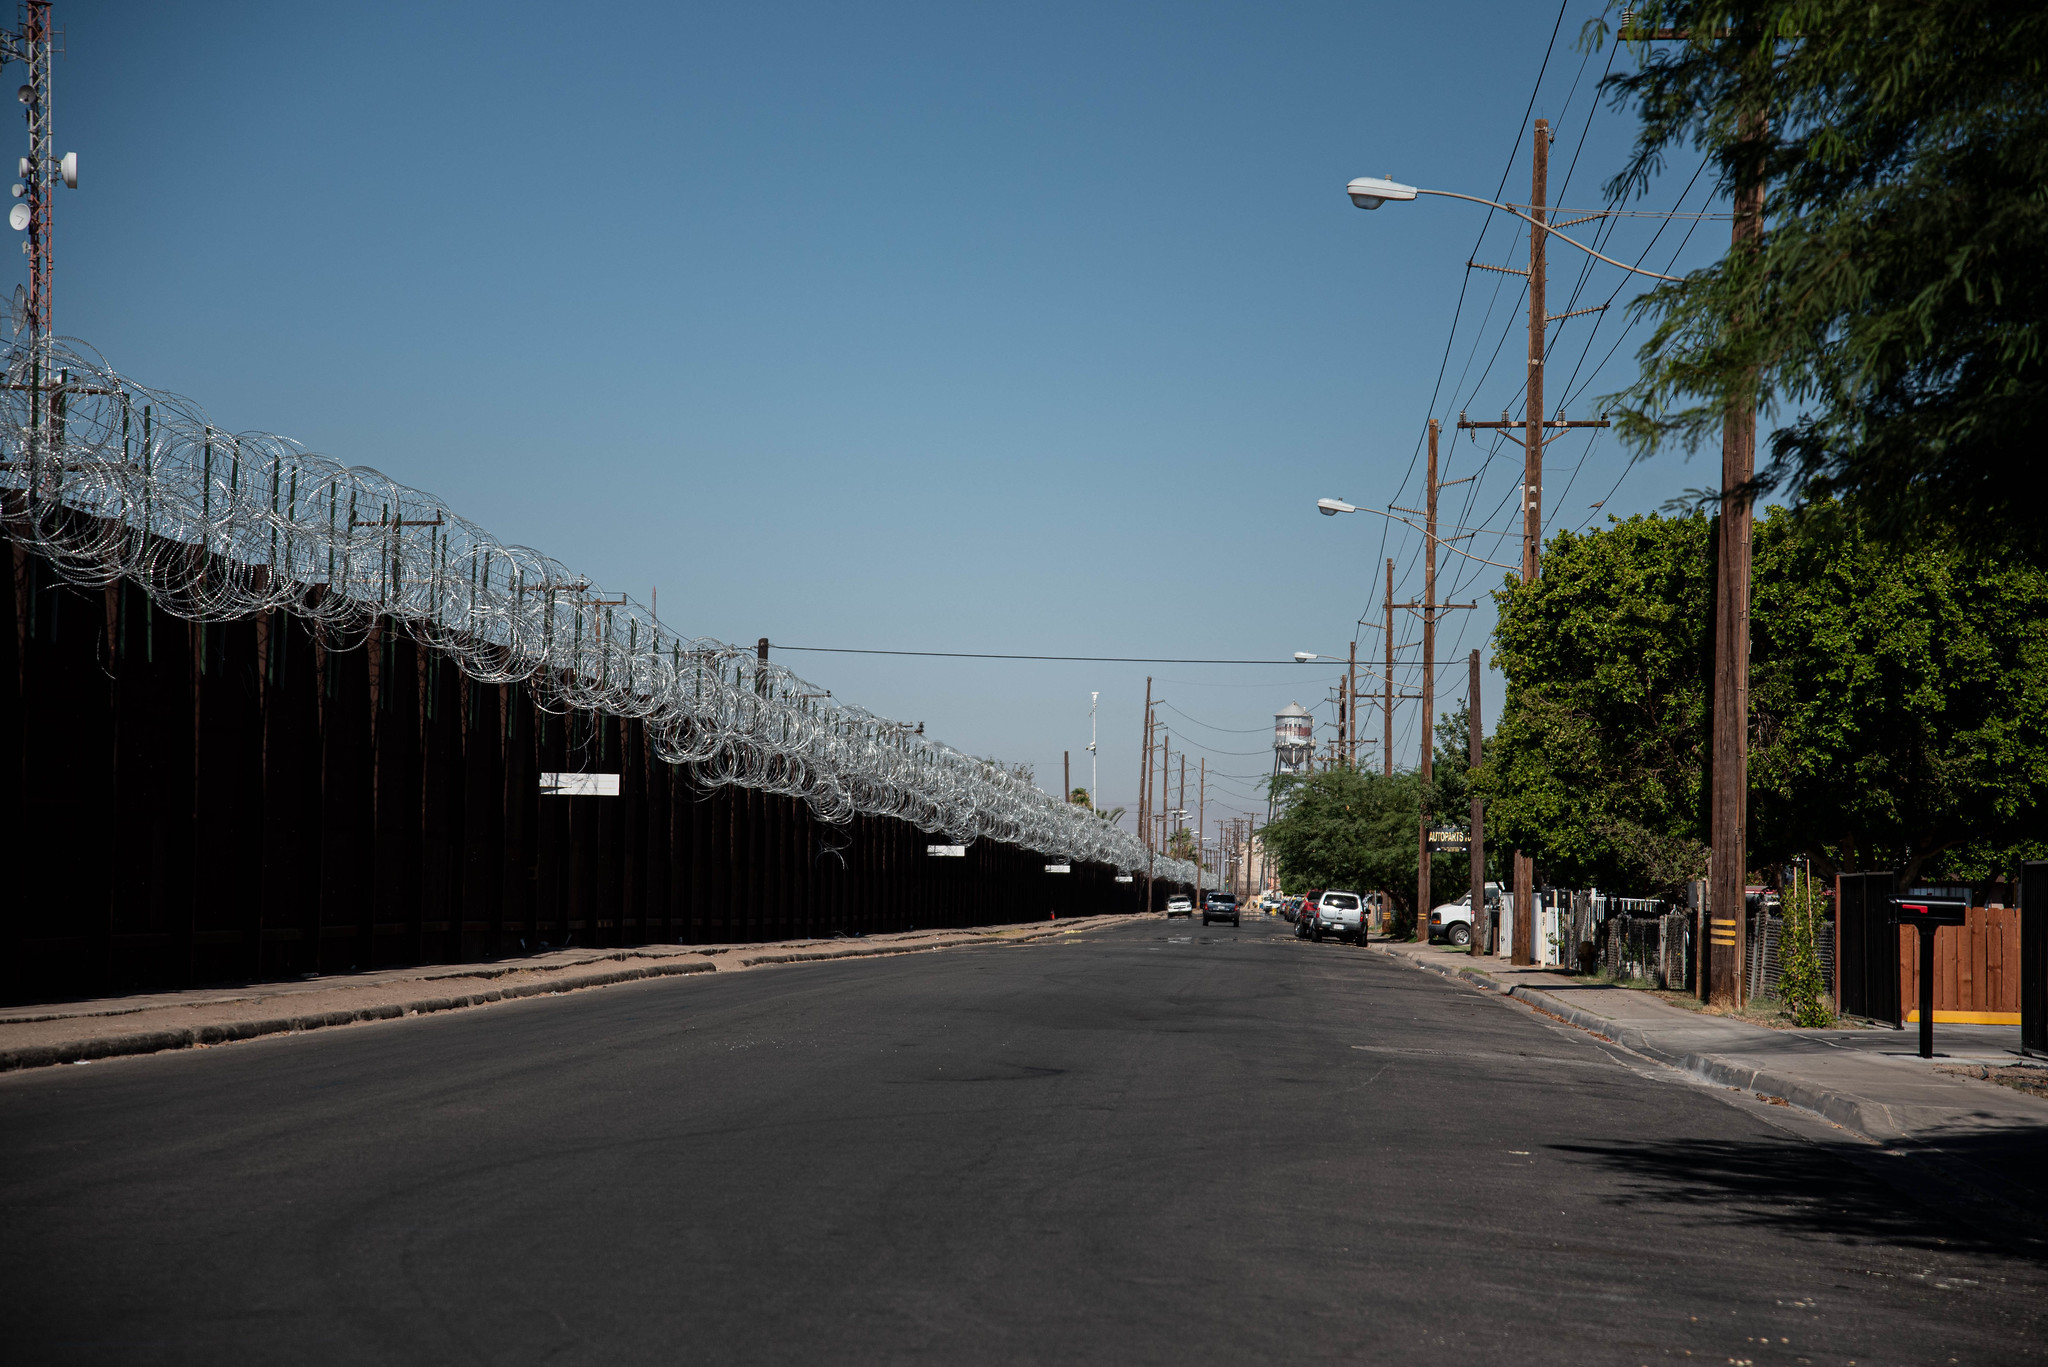 Double Check: Were Immigration Detention "Cages" Built by the Obama Administration?